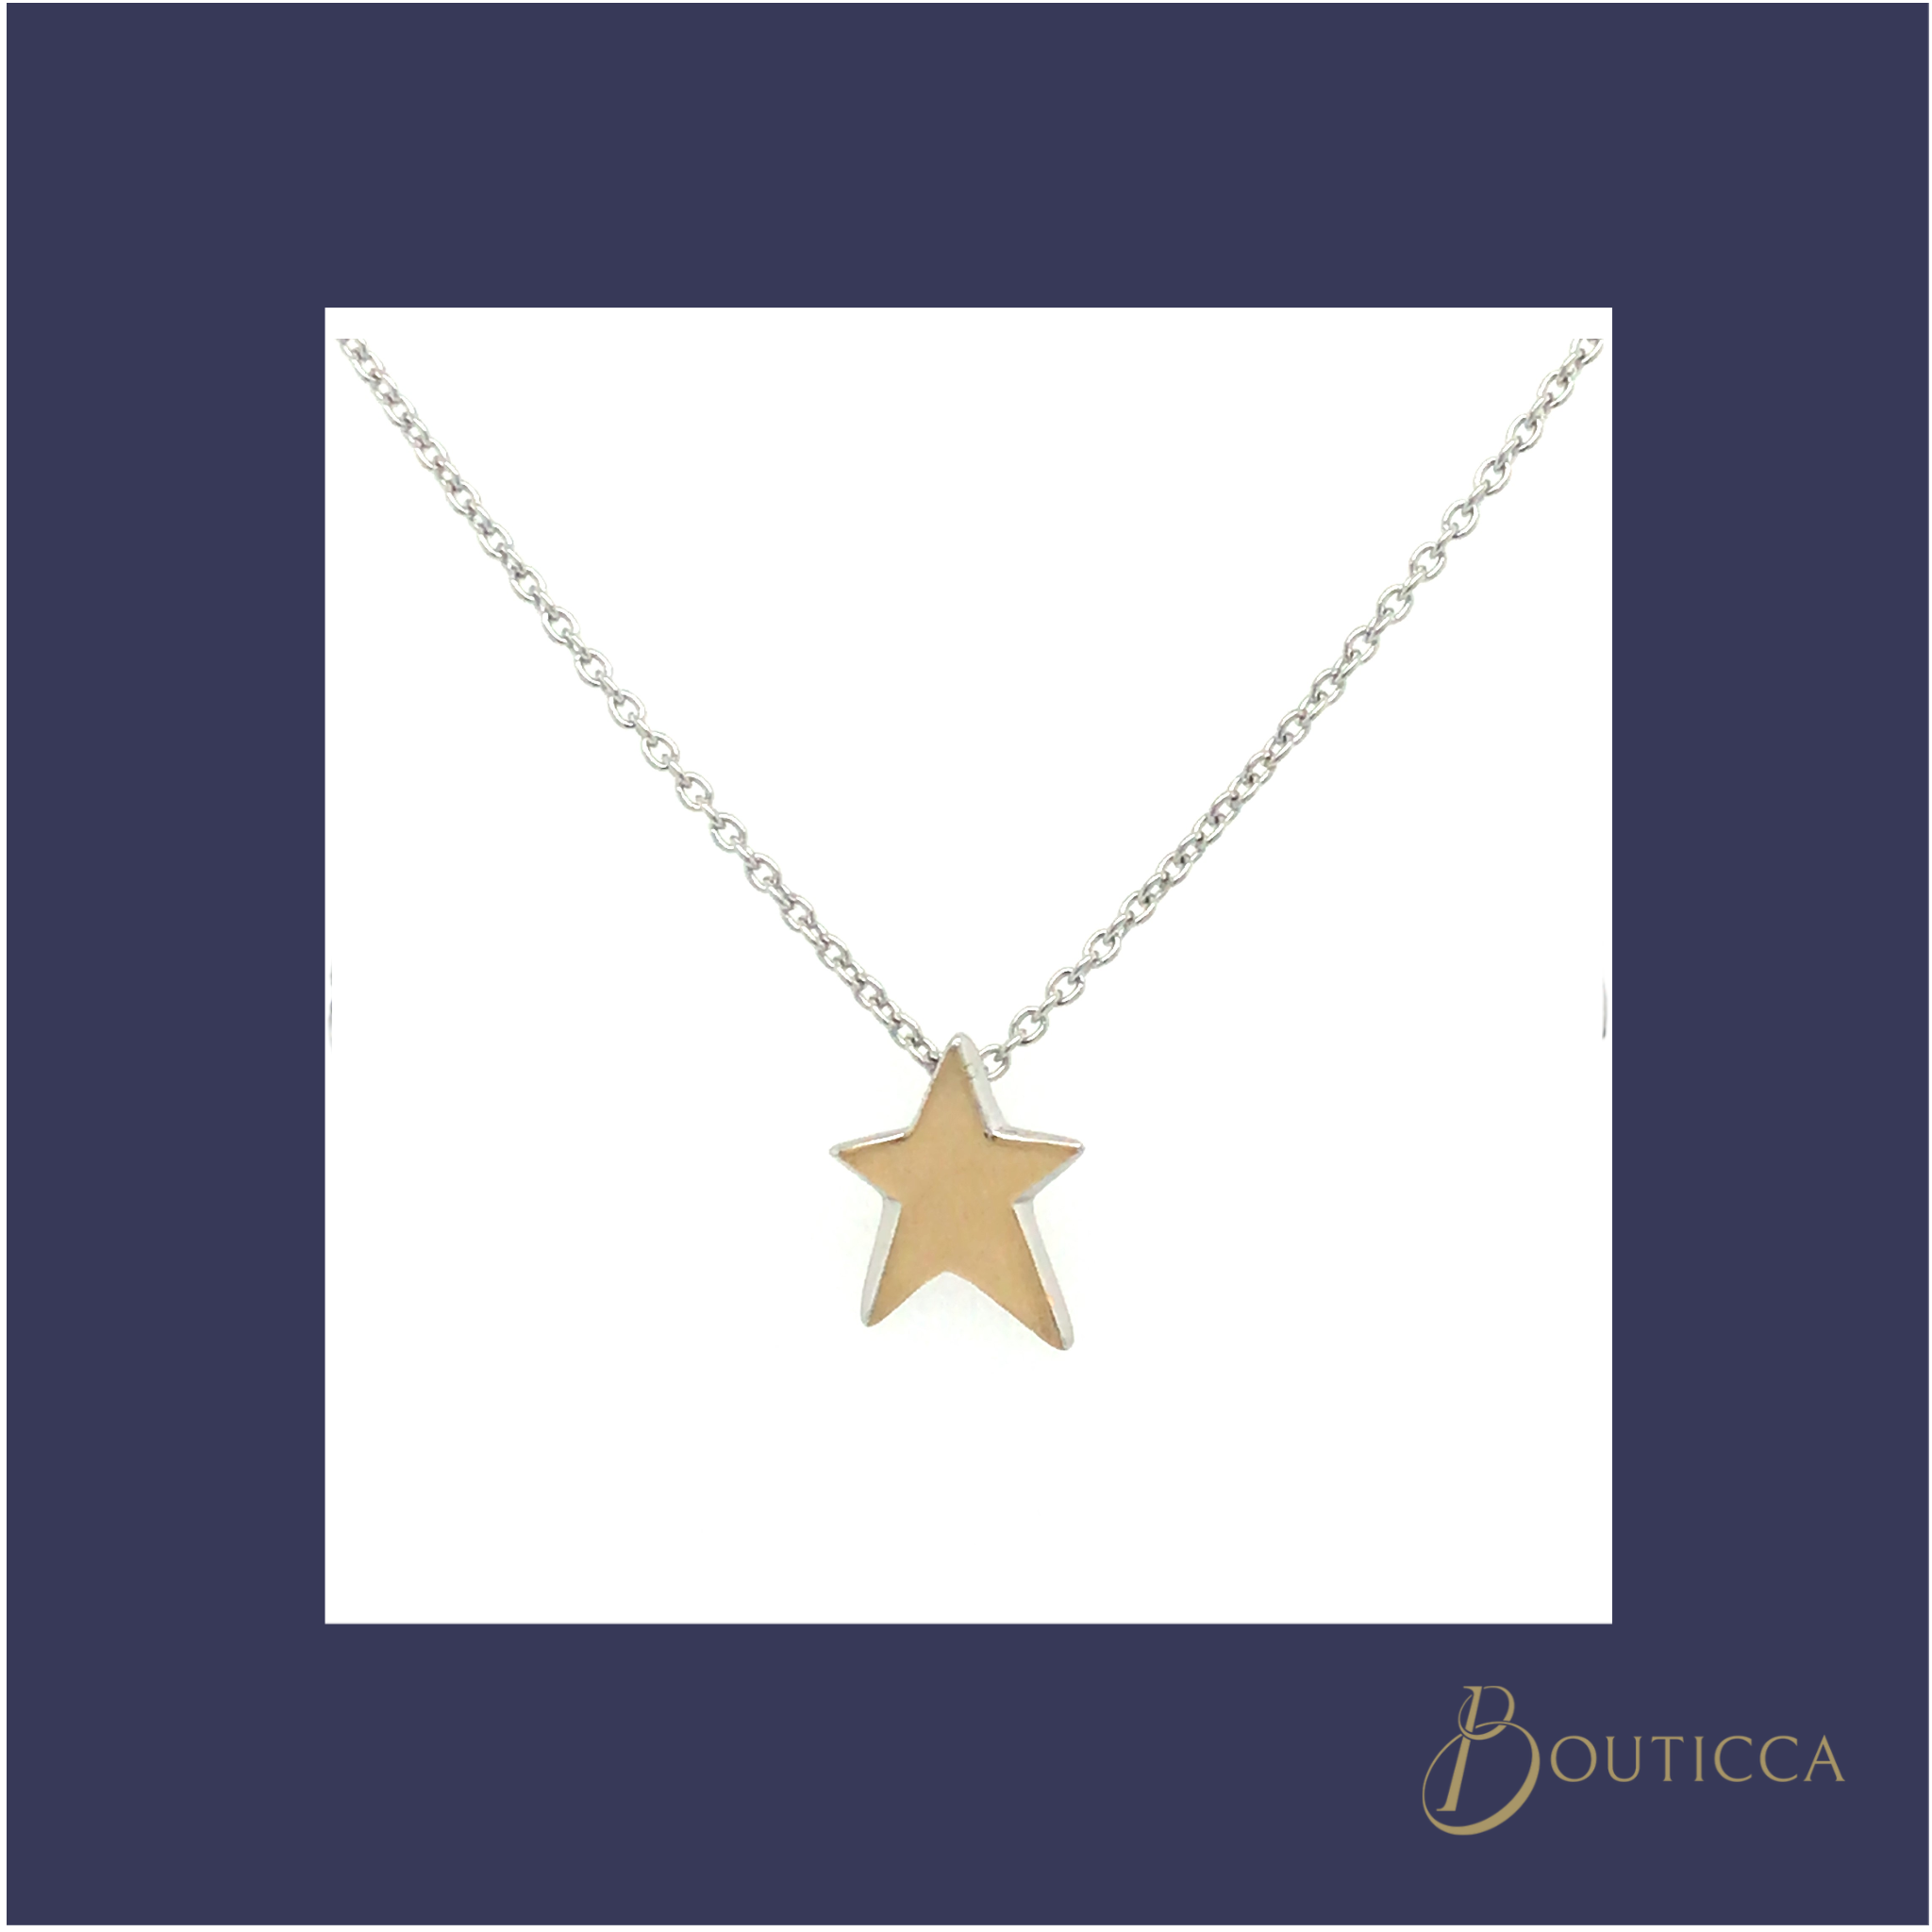 Gold Plated Star Pendant Necklace with a satin finish